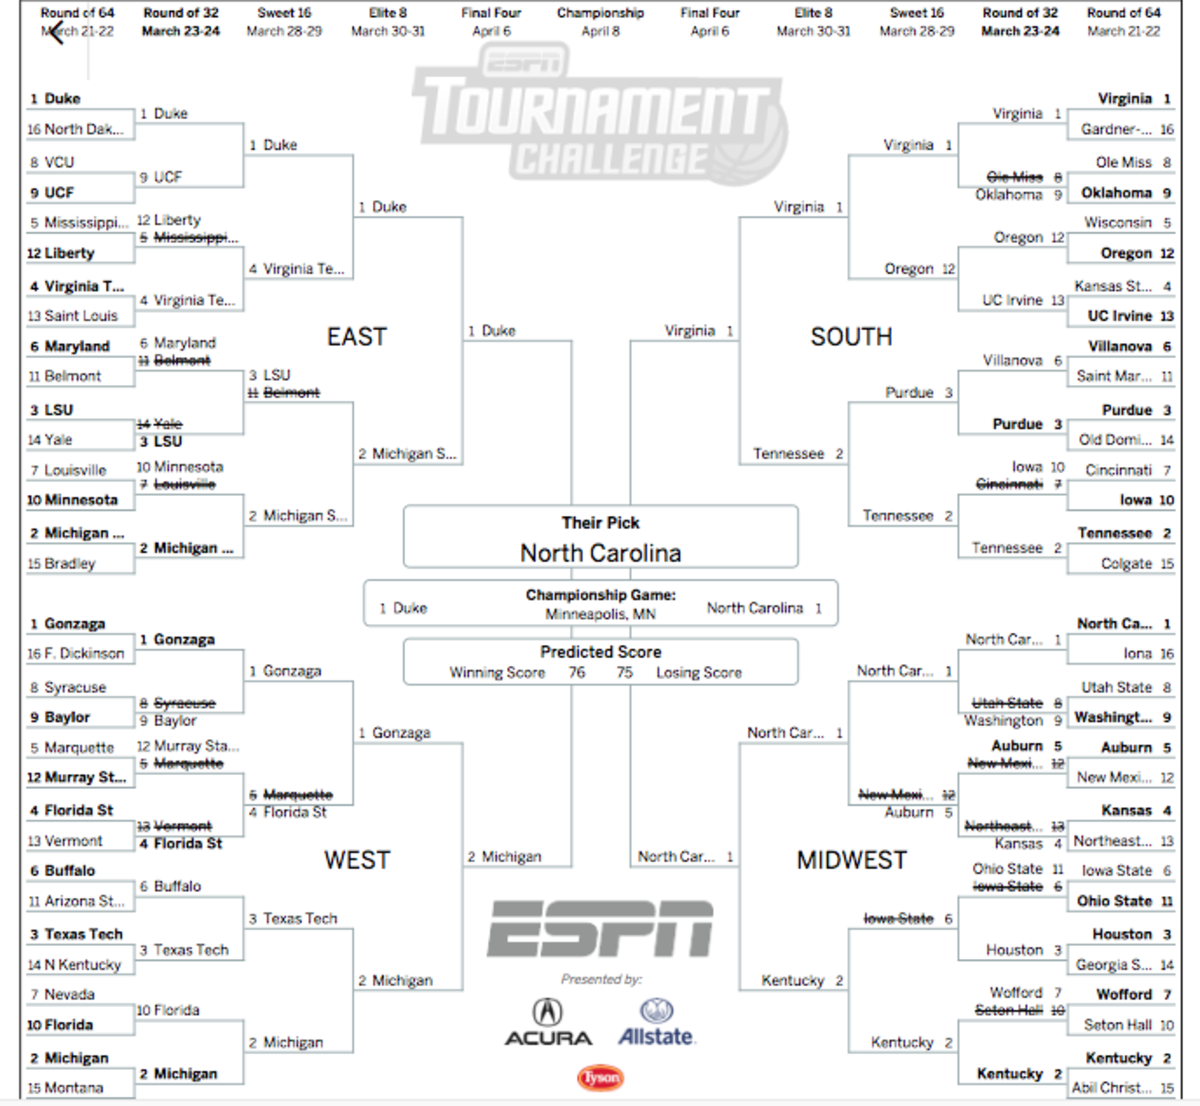 Jay Bilas did not have a good bracket in the 2019 NCAA Tournament.